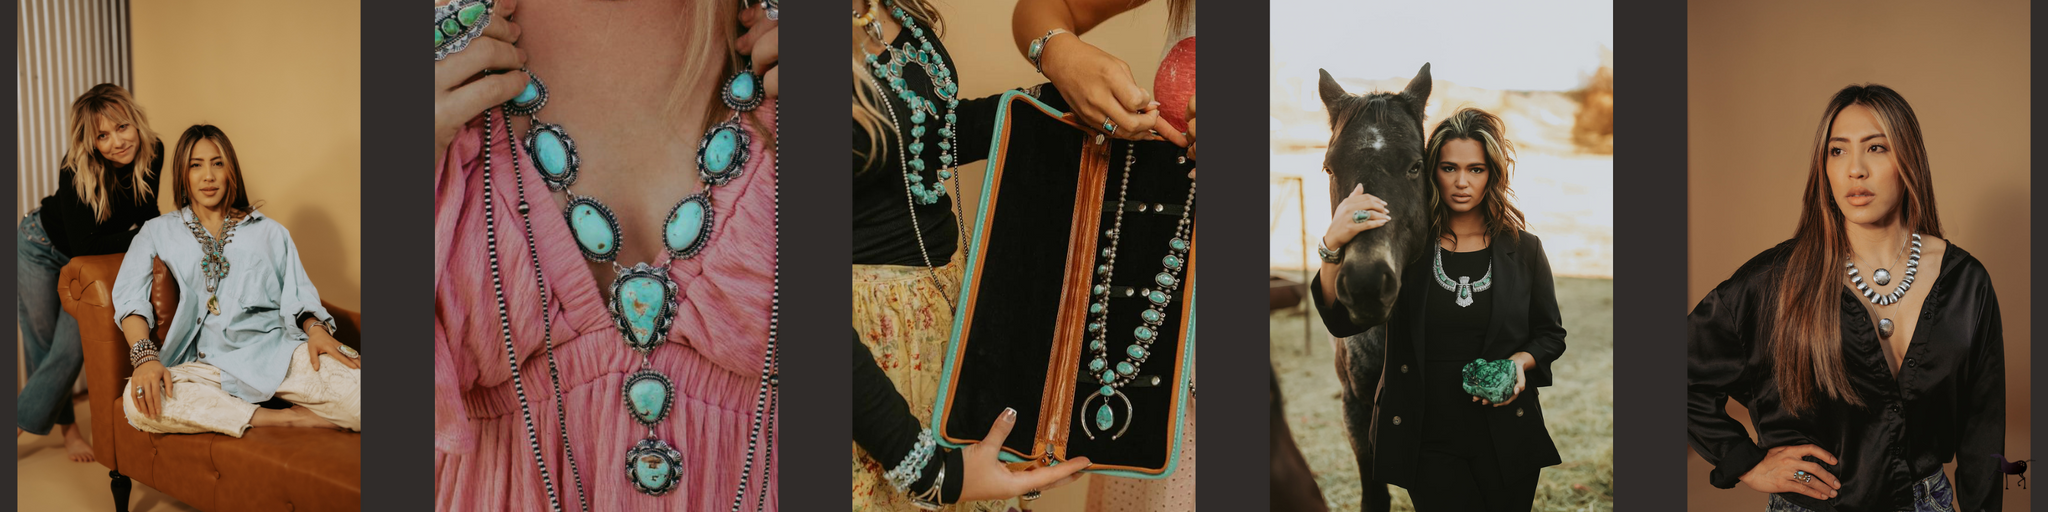 authentic turquoise jewelry from Native American artist